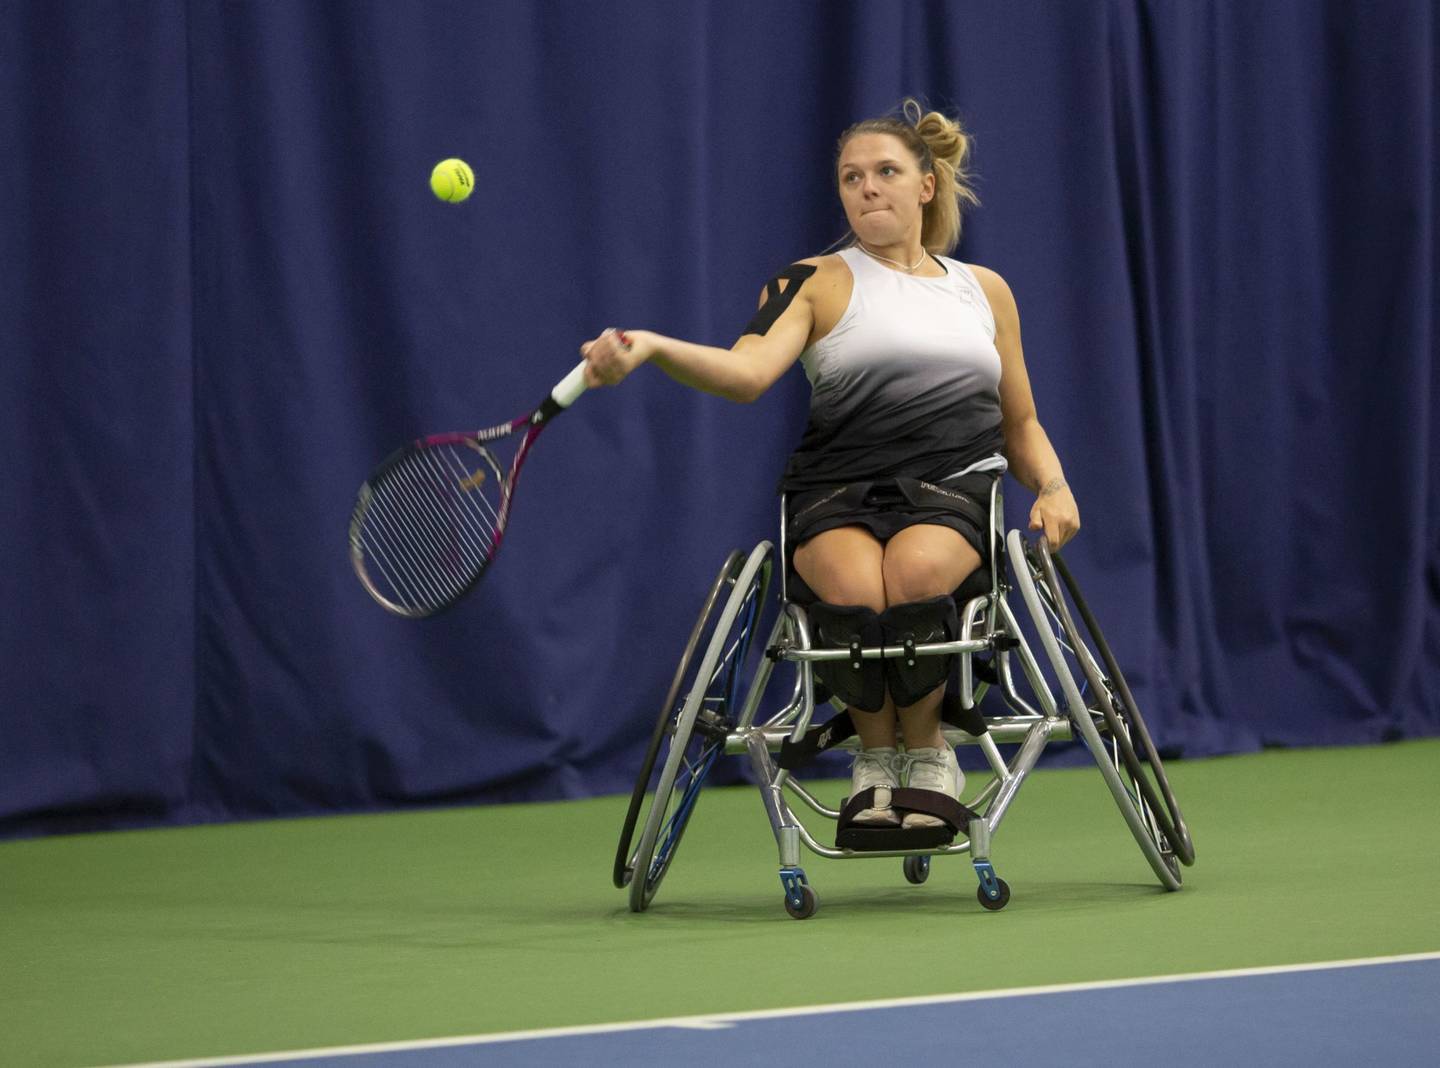 Jordanne Whiley hitting forehand shot in tennis match